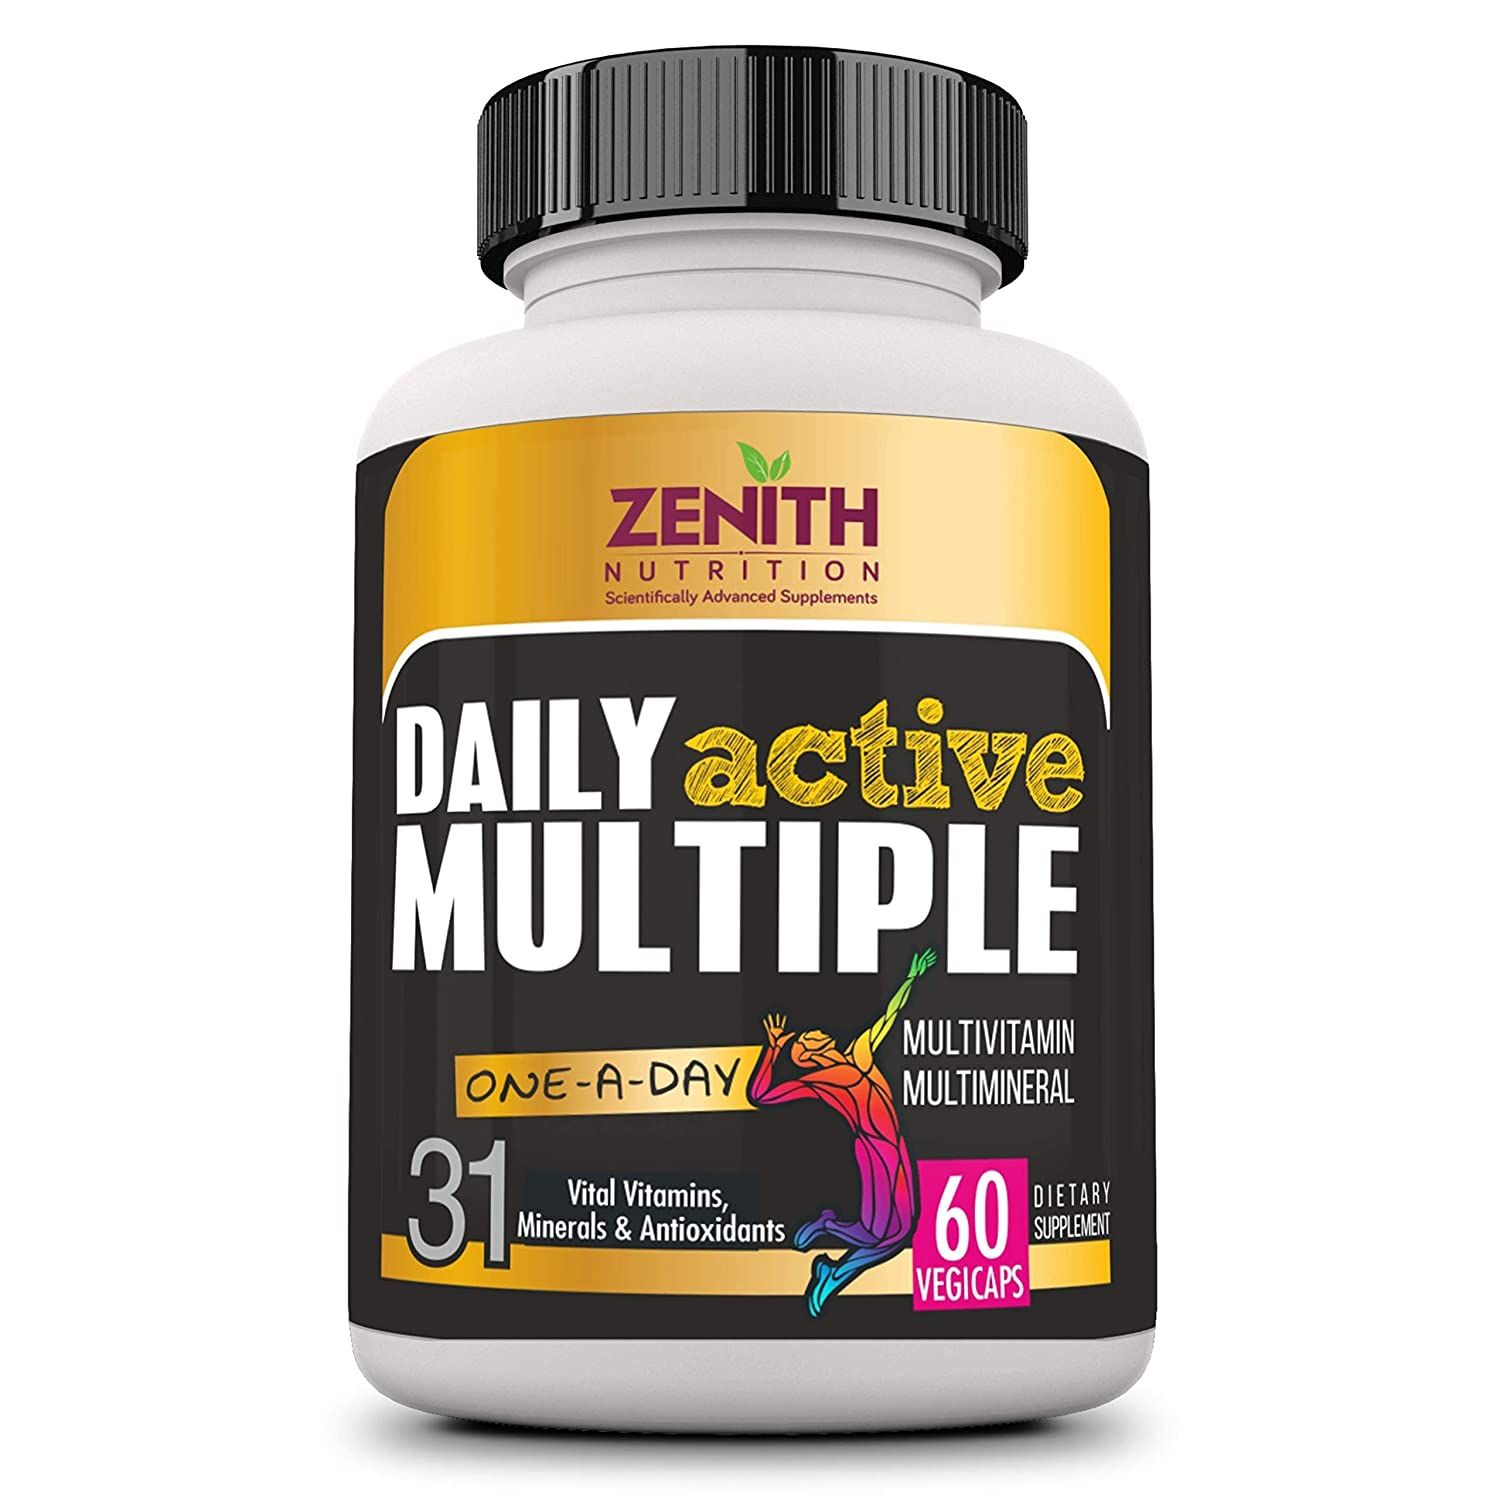 Zenith Nutrition Daily Active Multiple Image